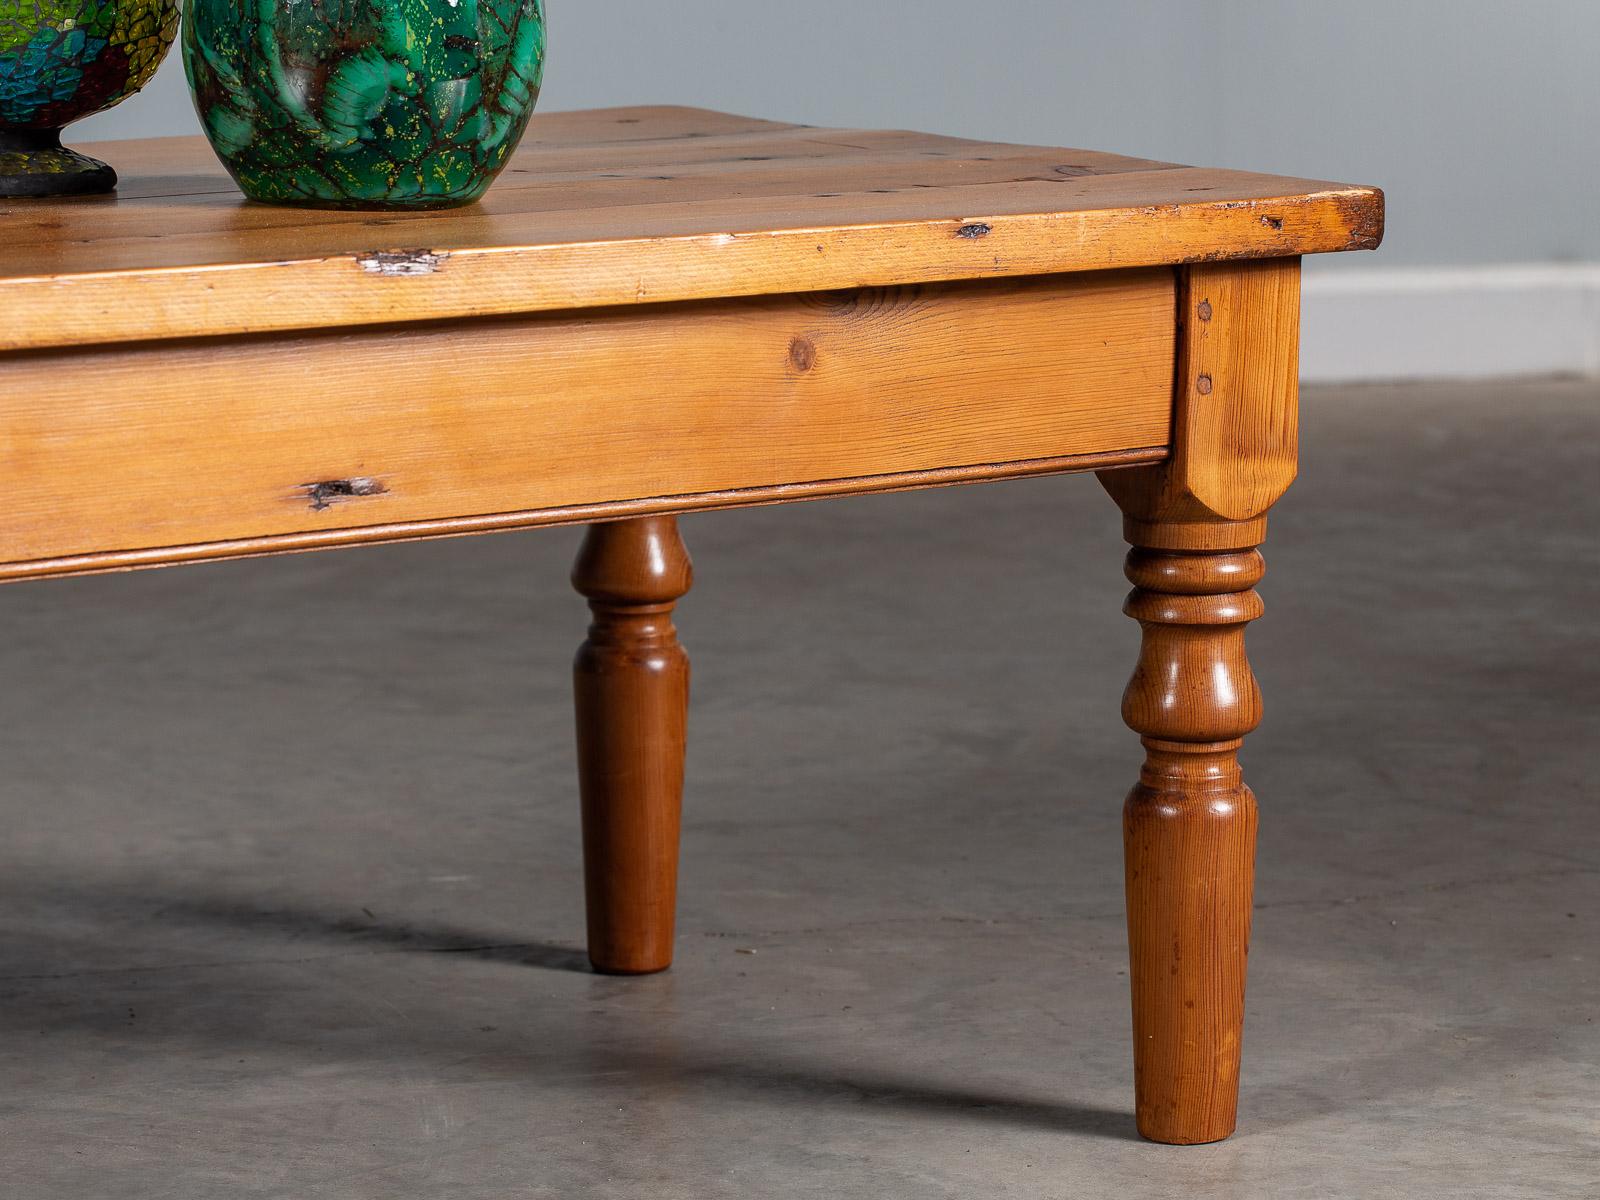 Country Antique English Pine Coffee Table Turned Legs, circa 1875 For Sale